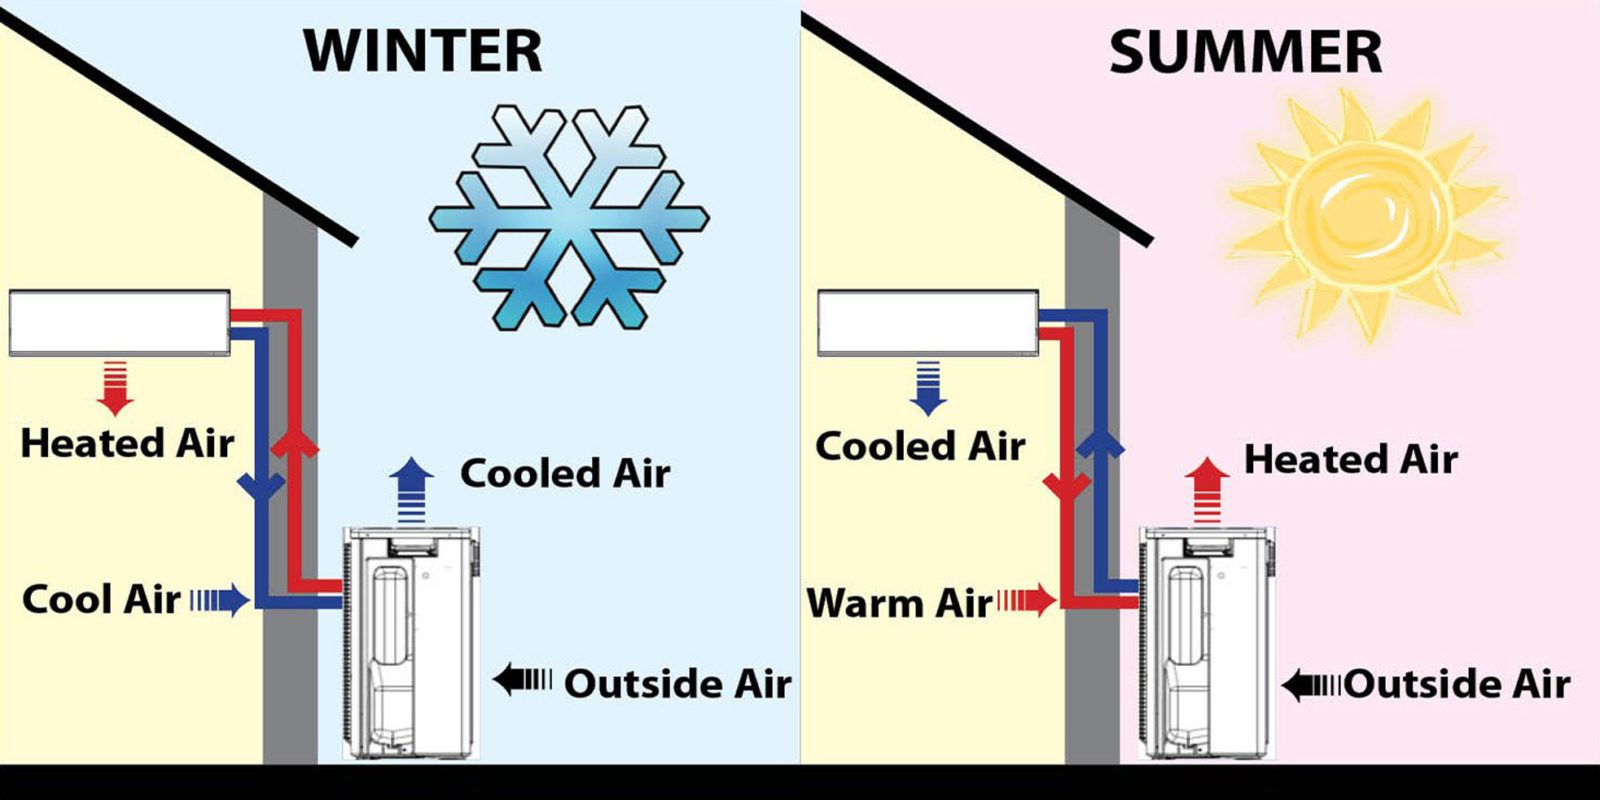 Heat pumps move cool and warm air around depending on the season